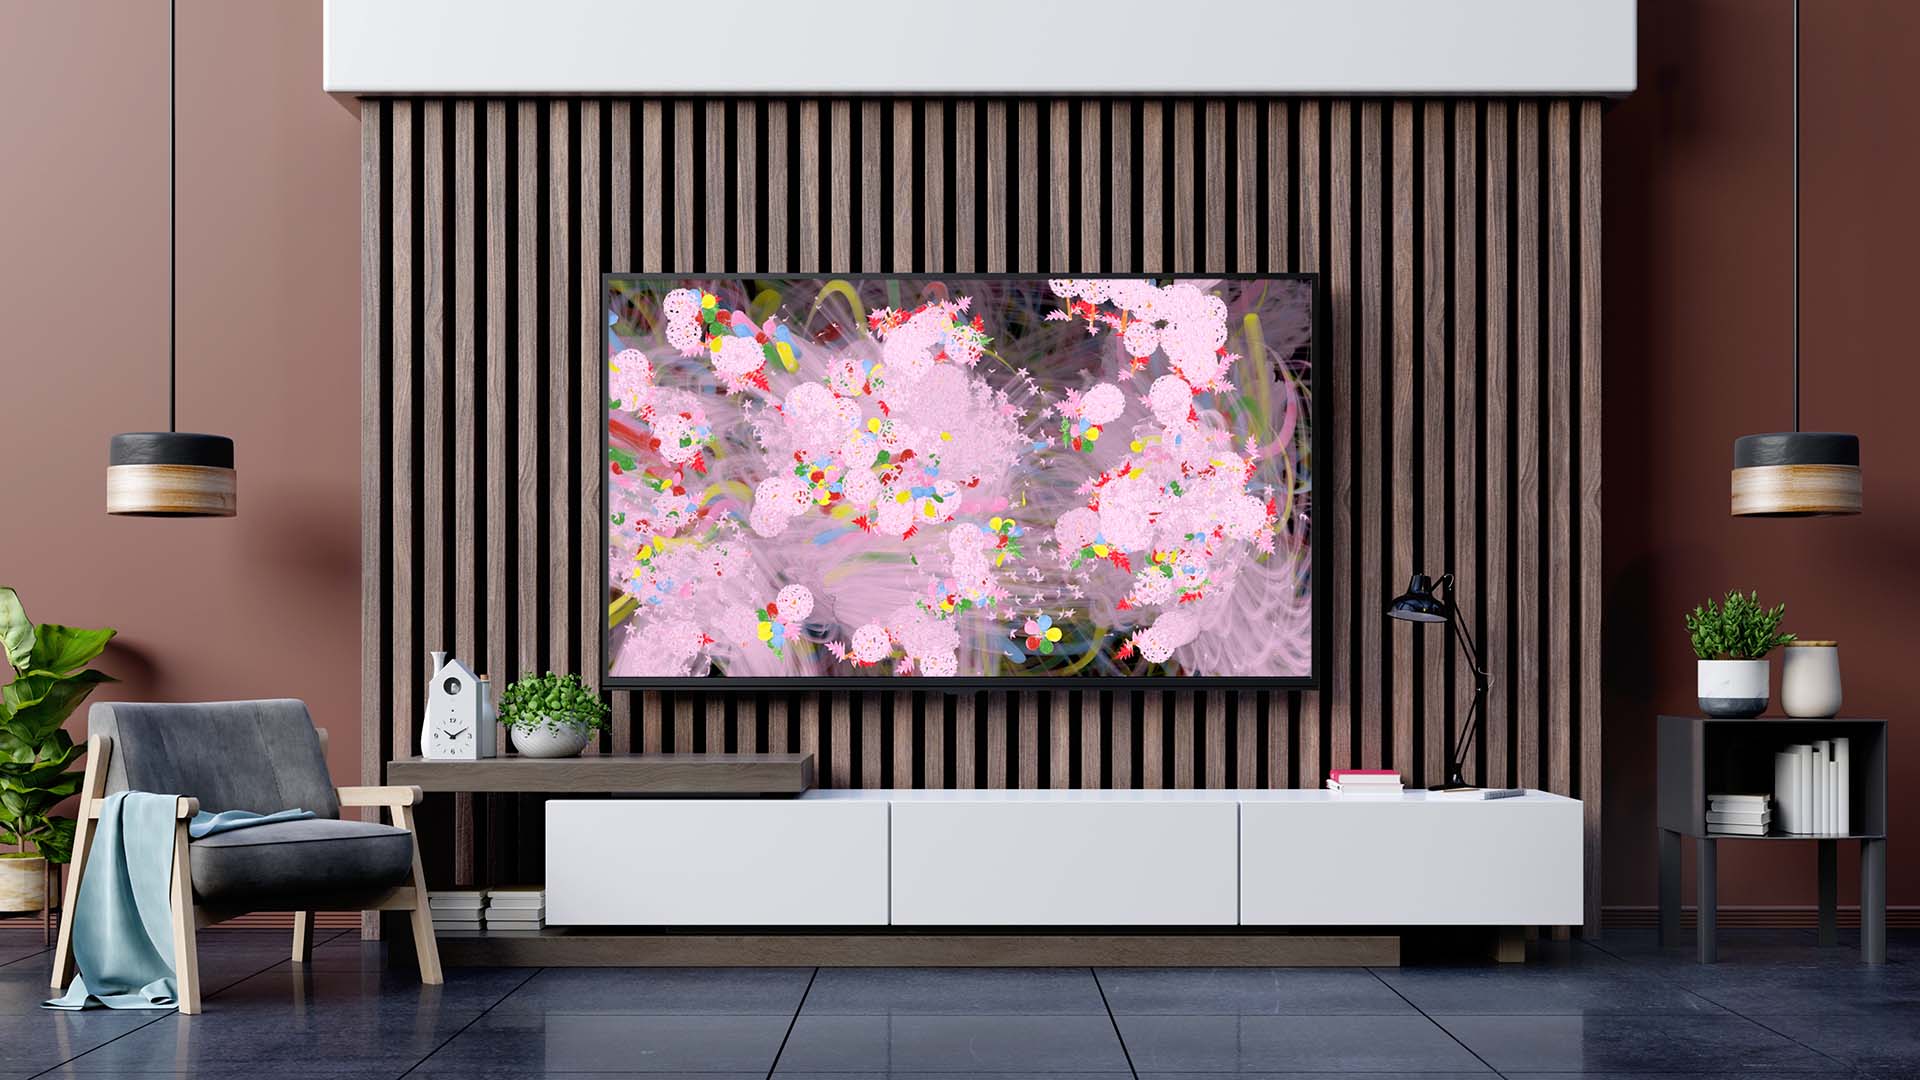 'Flowers Bombing Home' Is the New Teamlab Artwork That You Can View and Participate In At Home